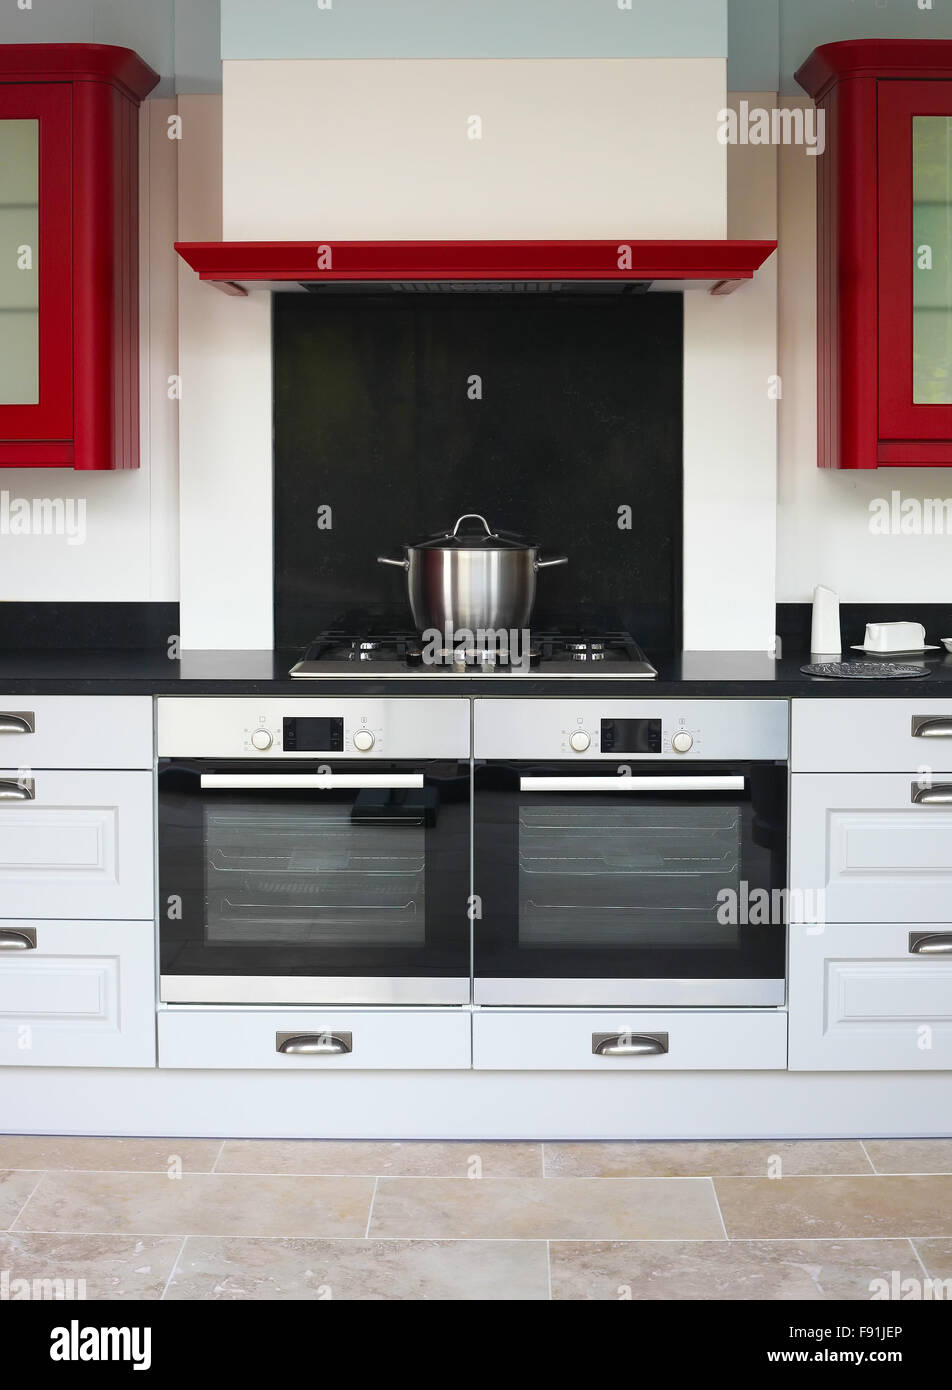 Modern black and white kitchen interior with red cupboards Stock Photo